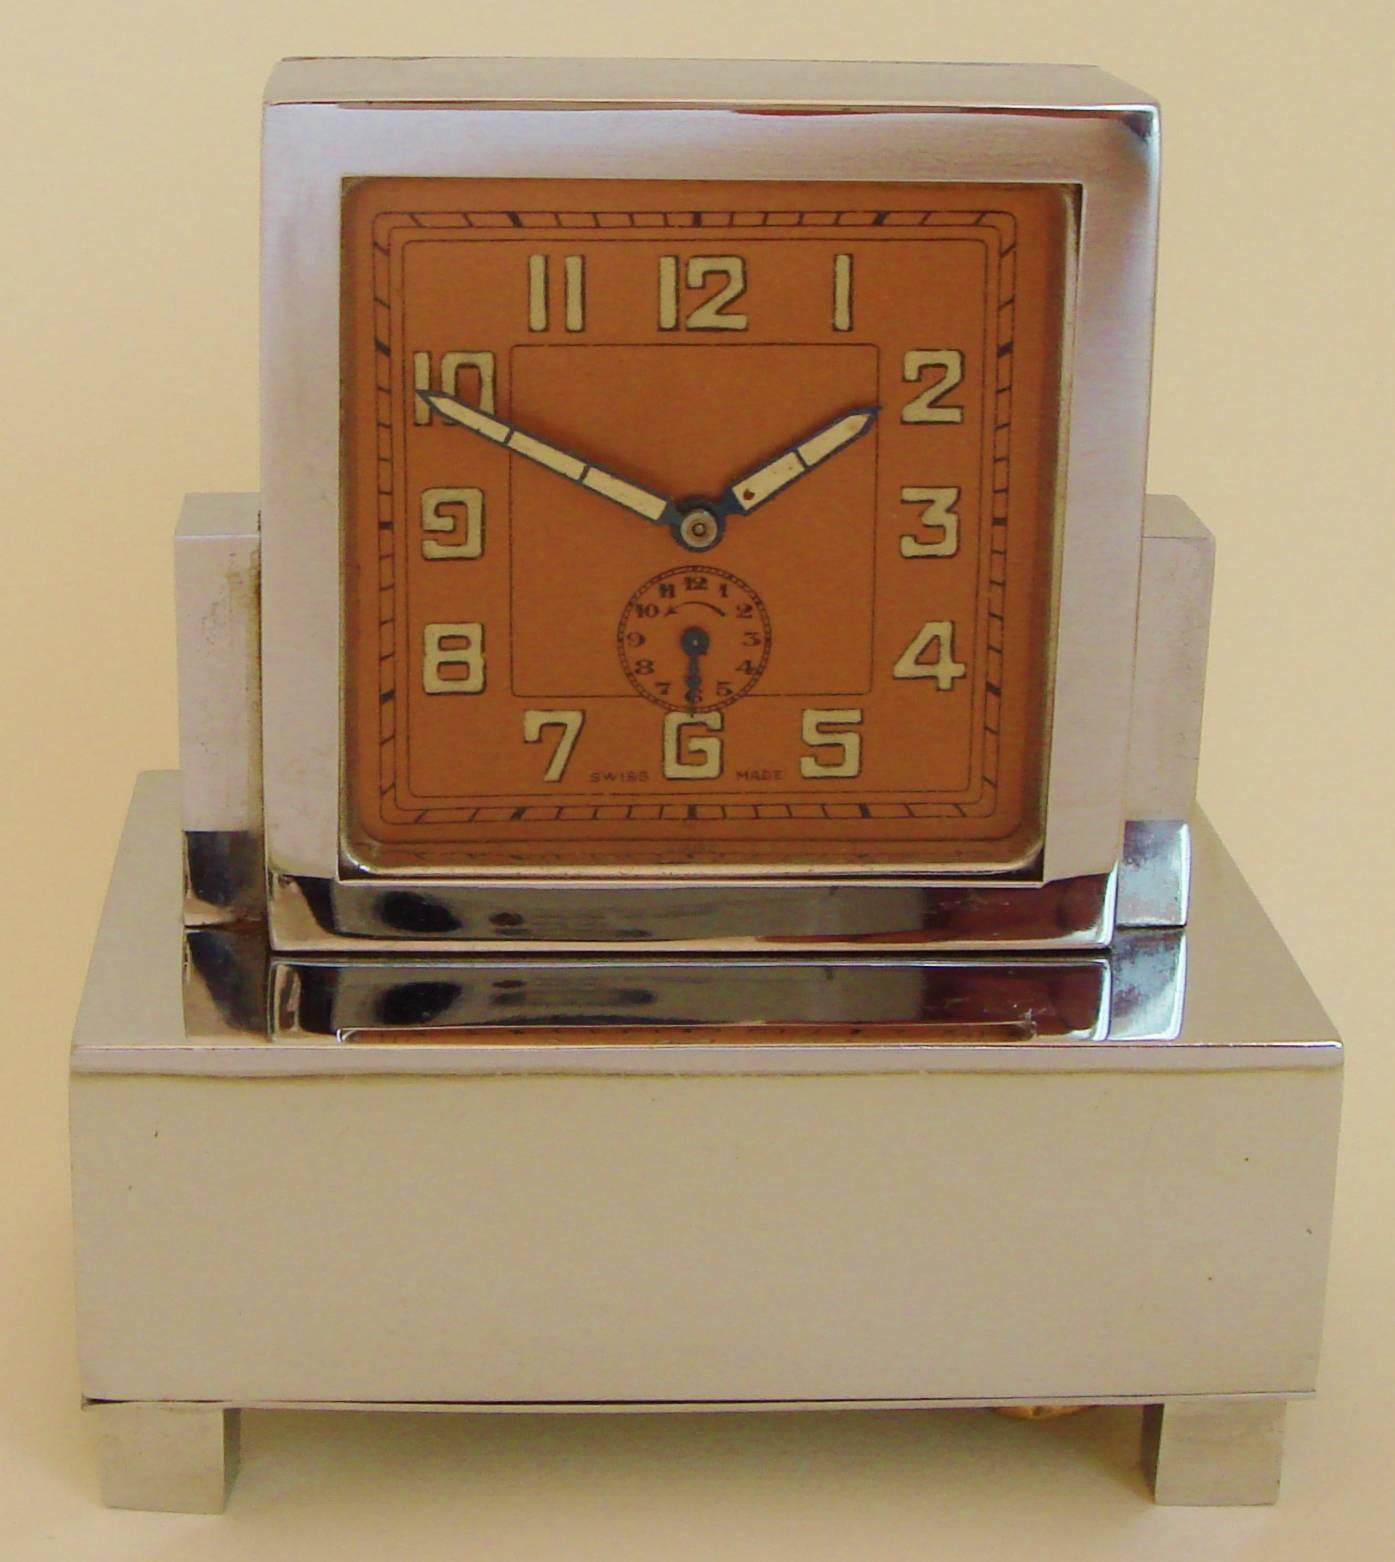 This architecturally designed Art Deco musical alarm clock is by the Liga Watch Company of Solevre, Switzerland. It features a chrome-plated geometric body standing on four cubed feet. The copper face with its Egyptian sans serif numerals and Art